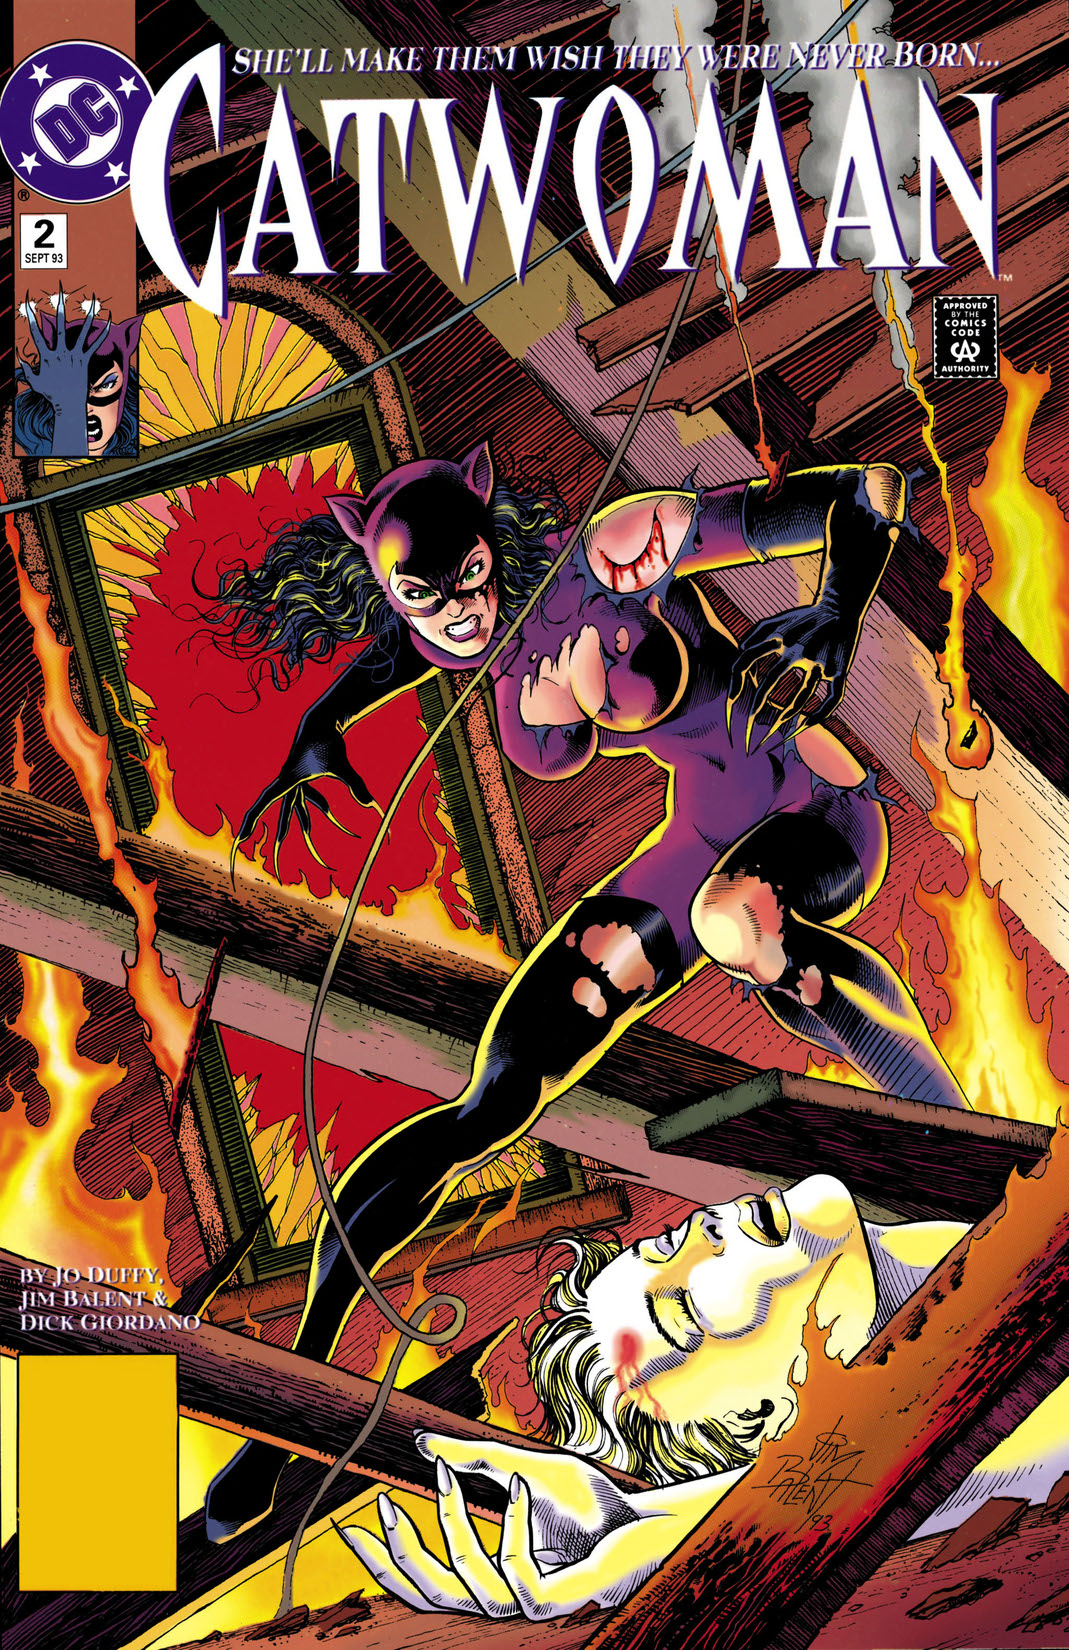 Catwoman (1993-) #2 preview images